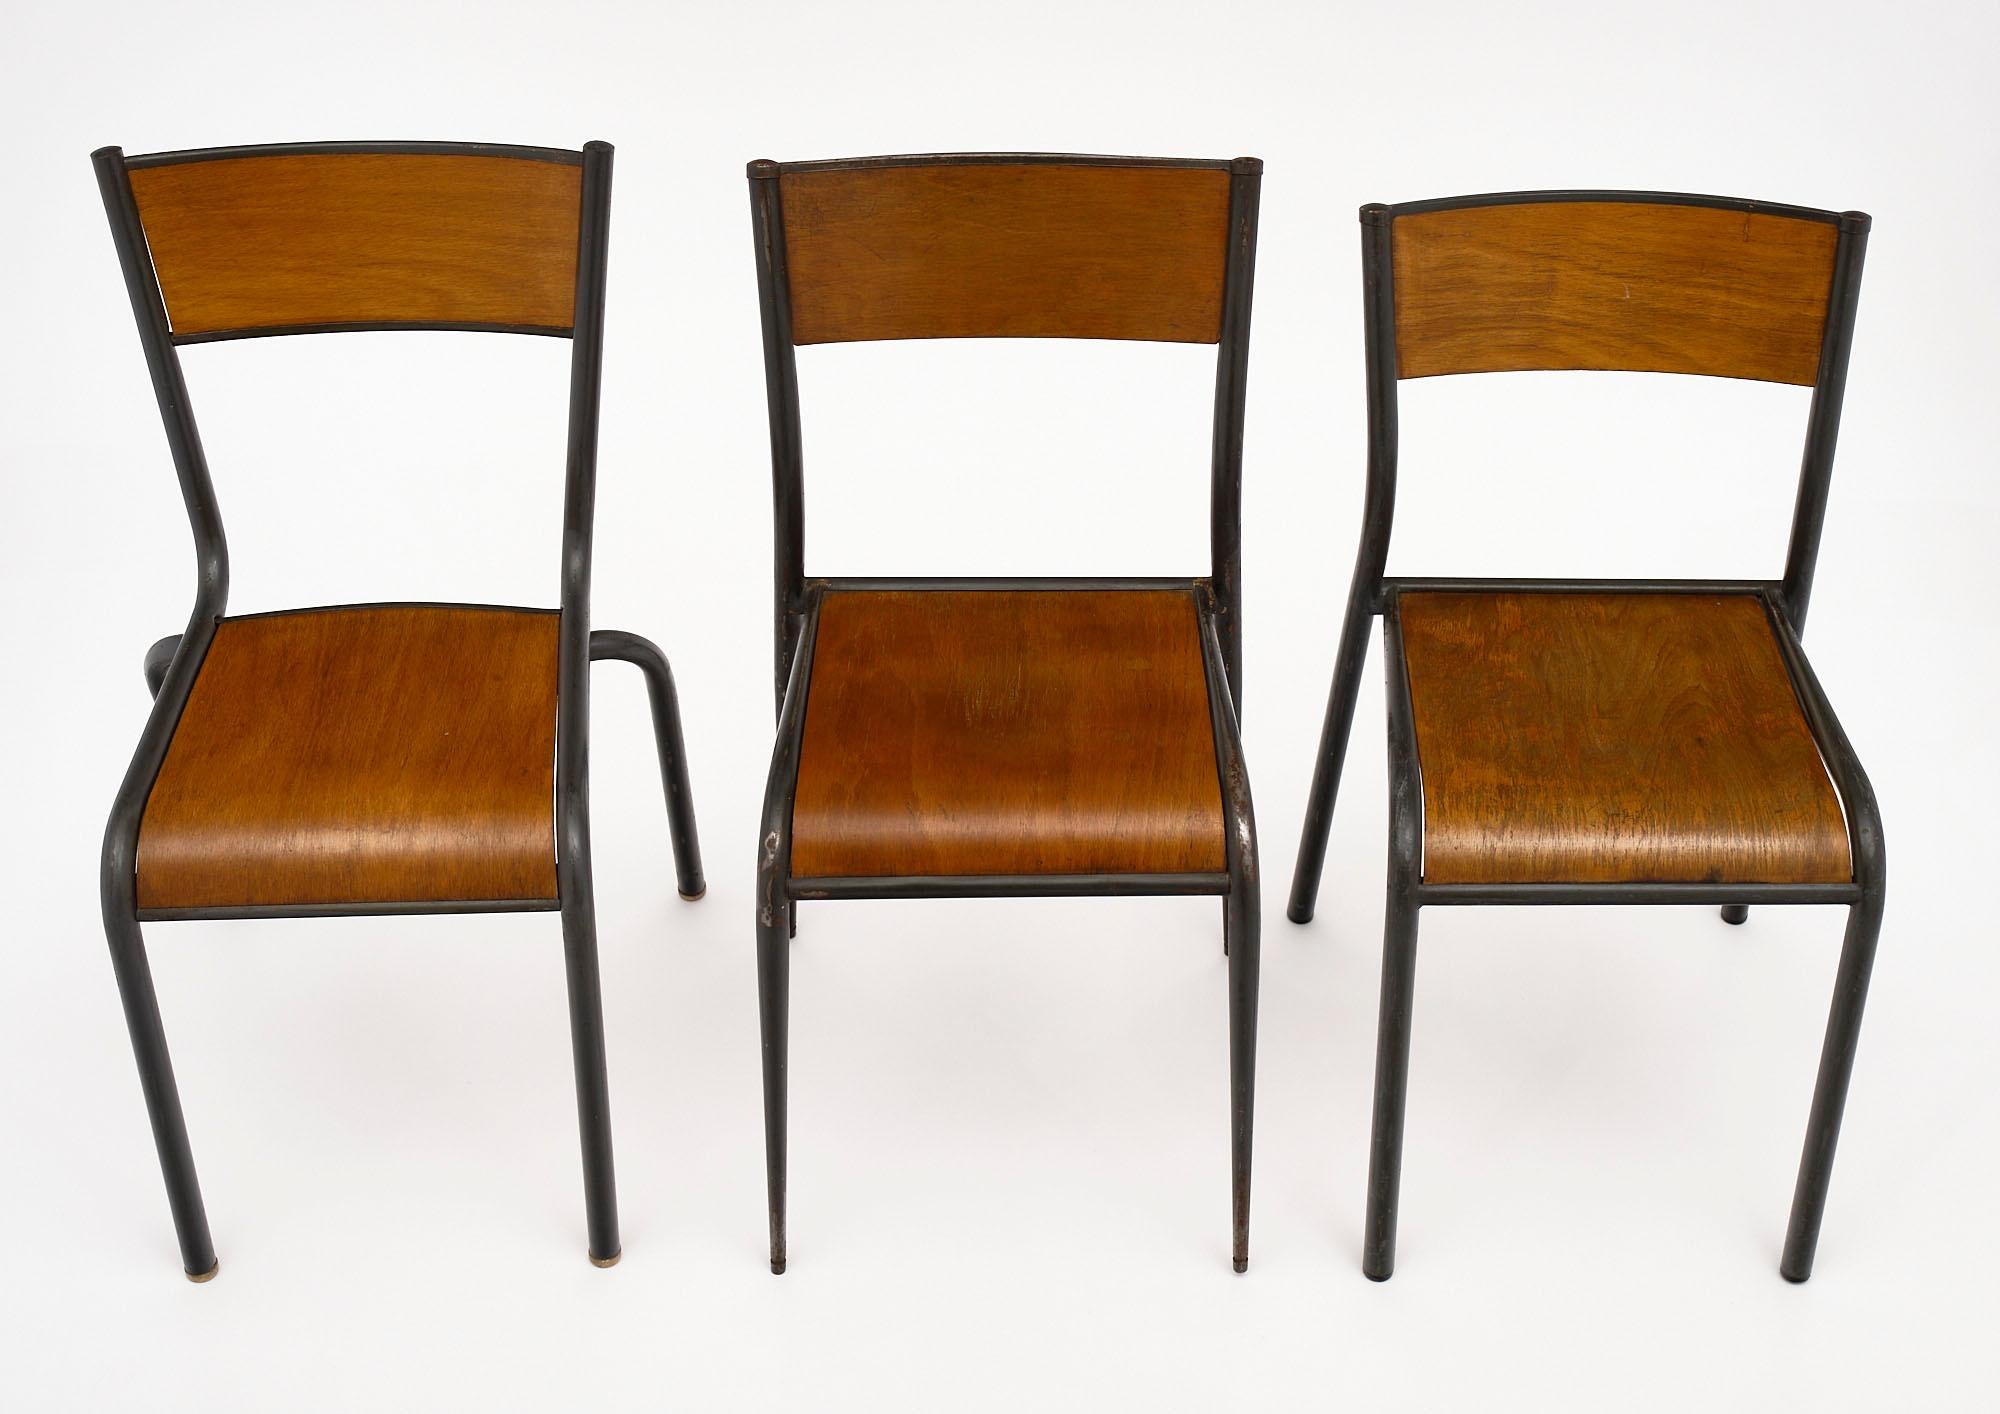 Set of 8 French industrial chairs from a silk manufacturer in the Lyon region. They feature the original painted steel and formed beech wood. The chairs are not identical, there are several different distinctive details for this superb set (shown in